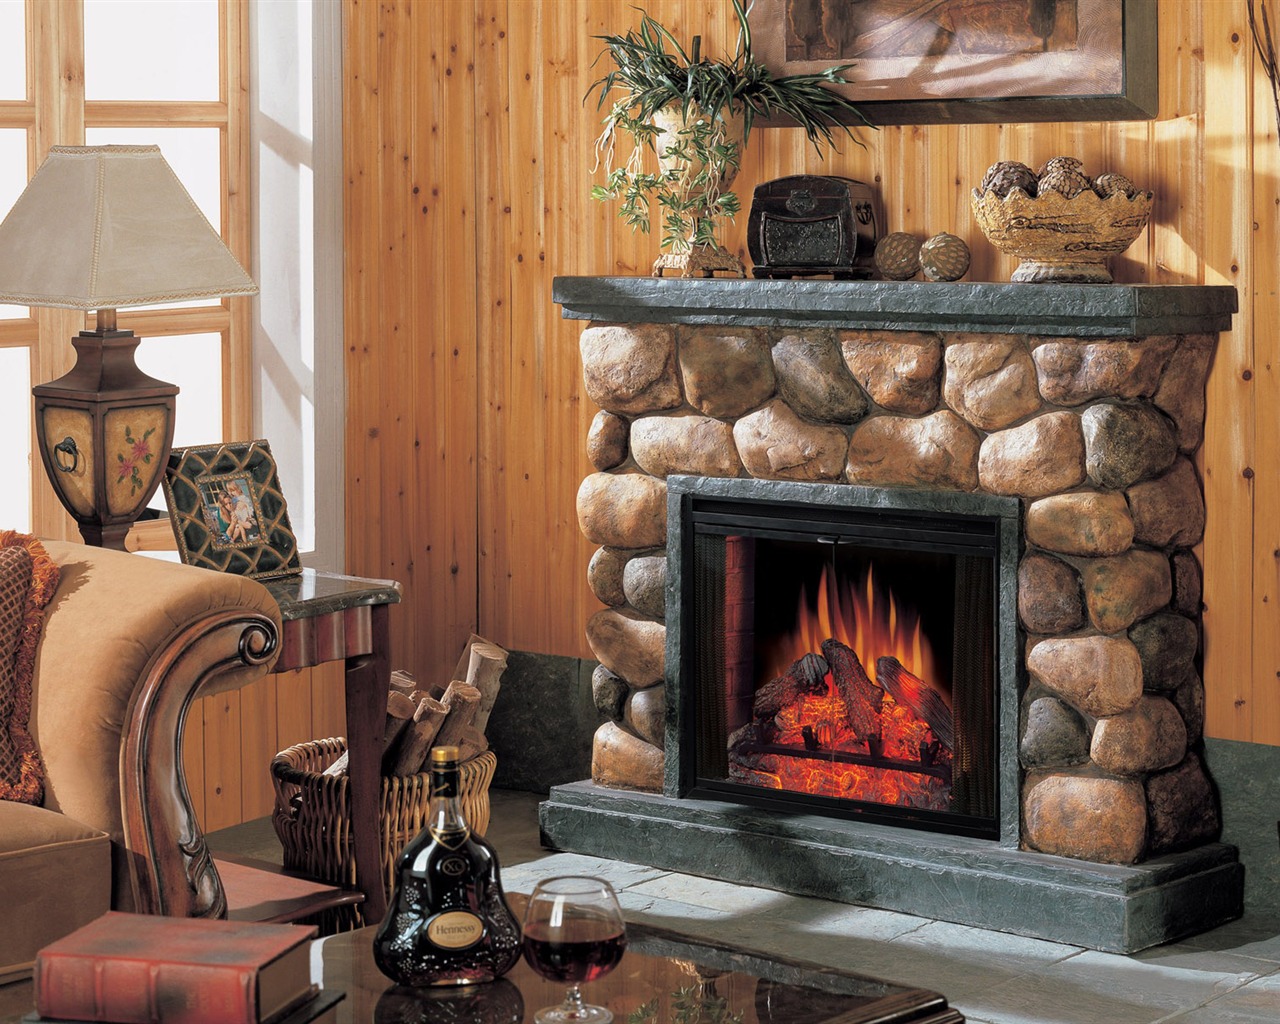 Western-style family fireplace wallpaper (1) #2 - 1280x1024